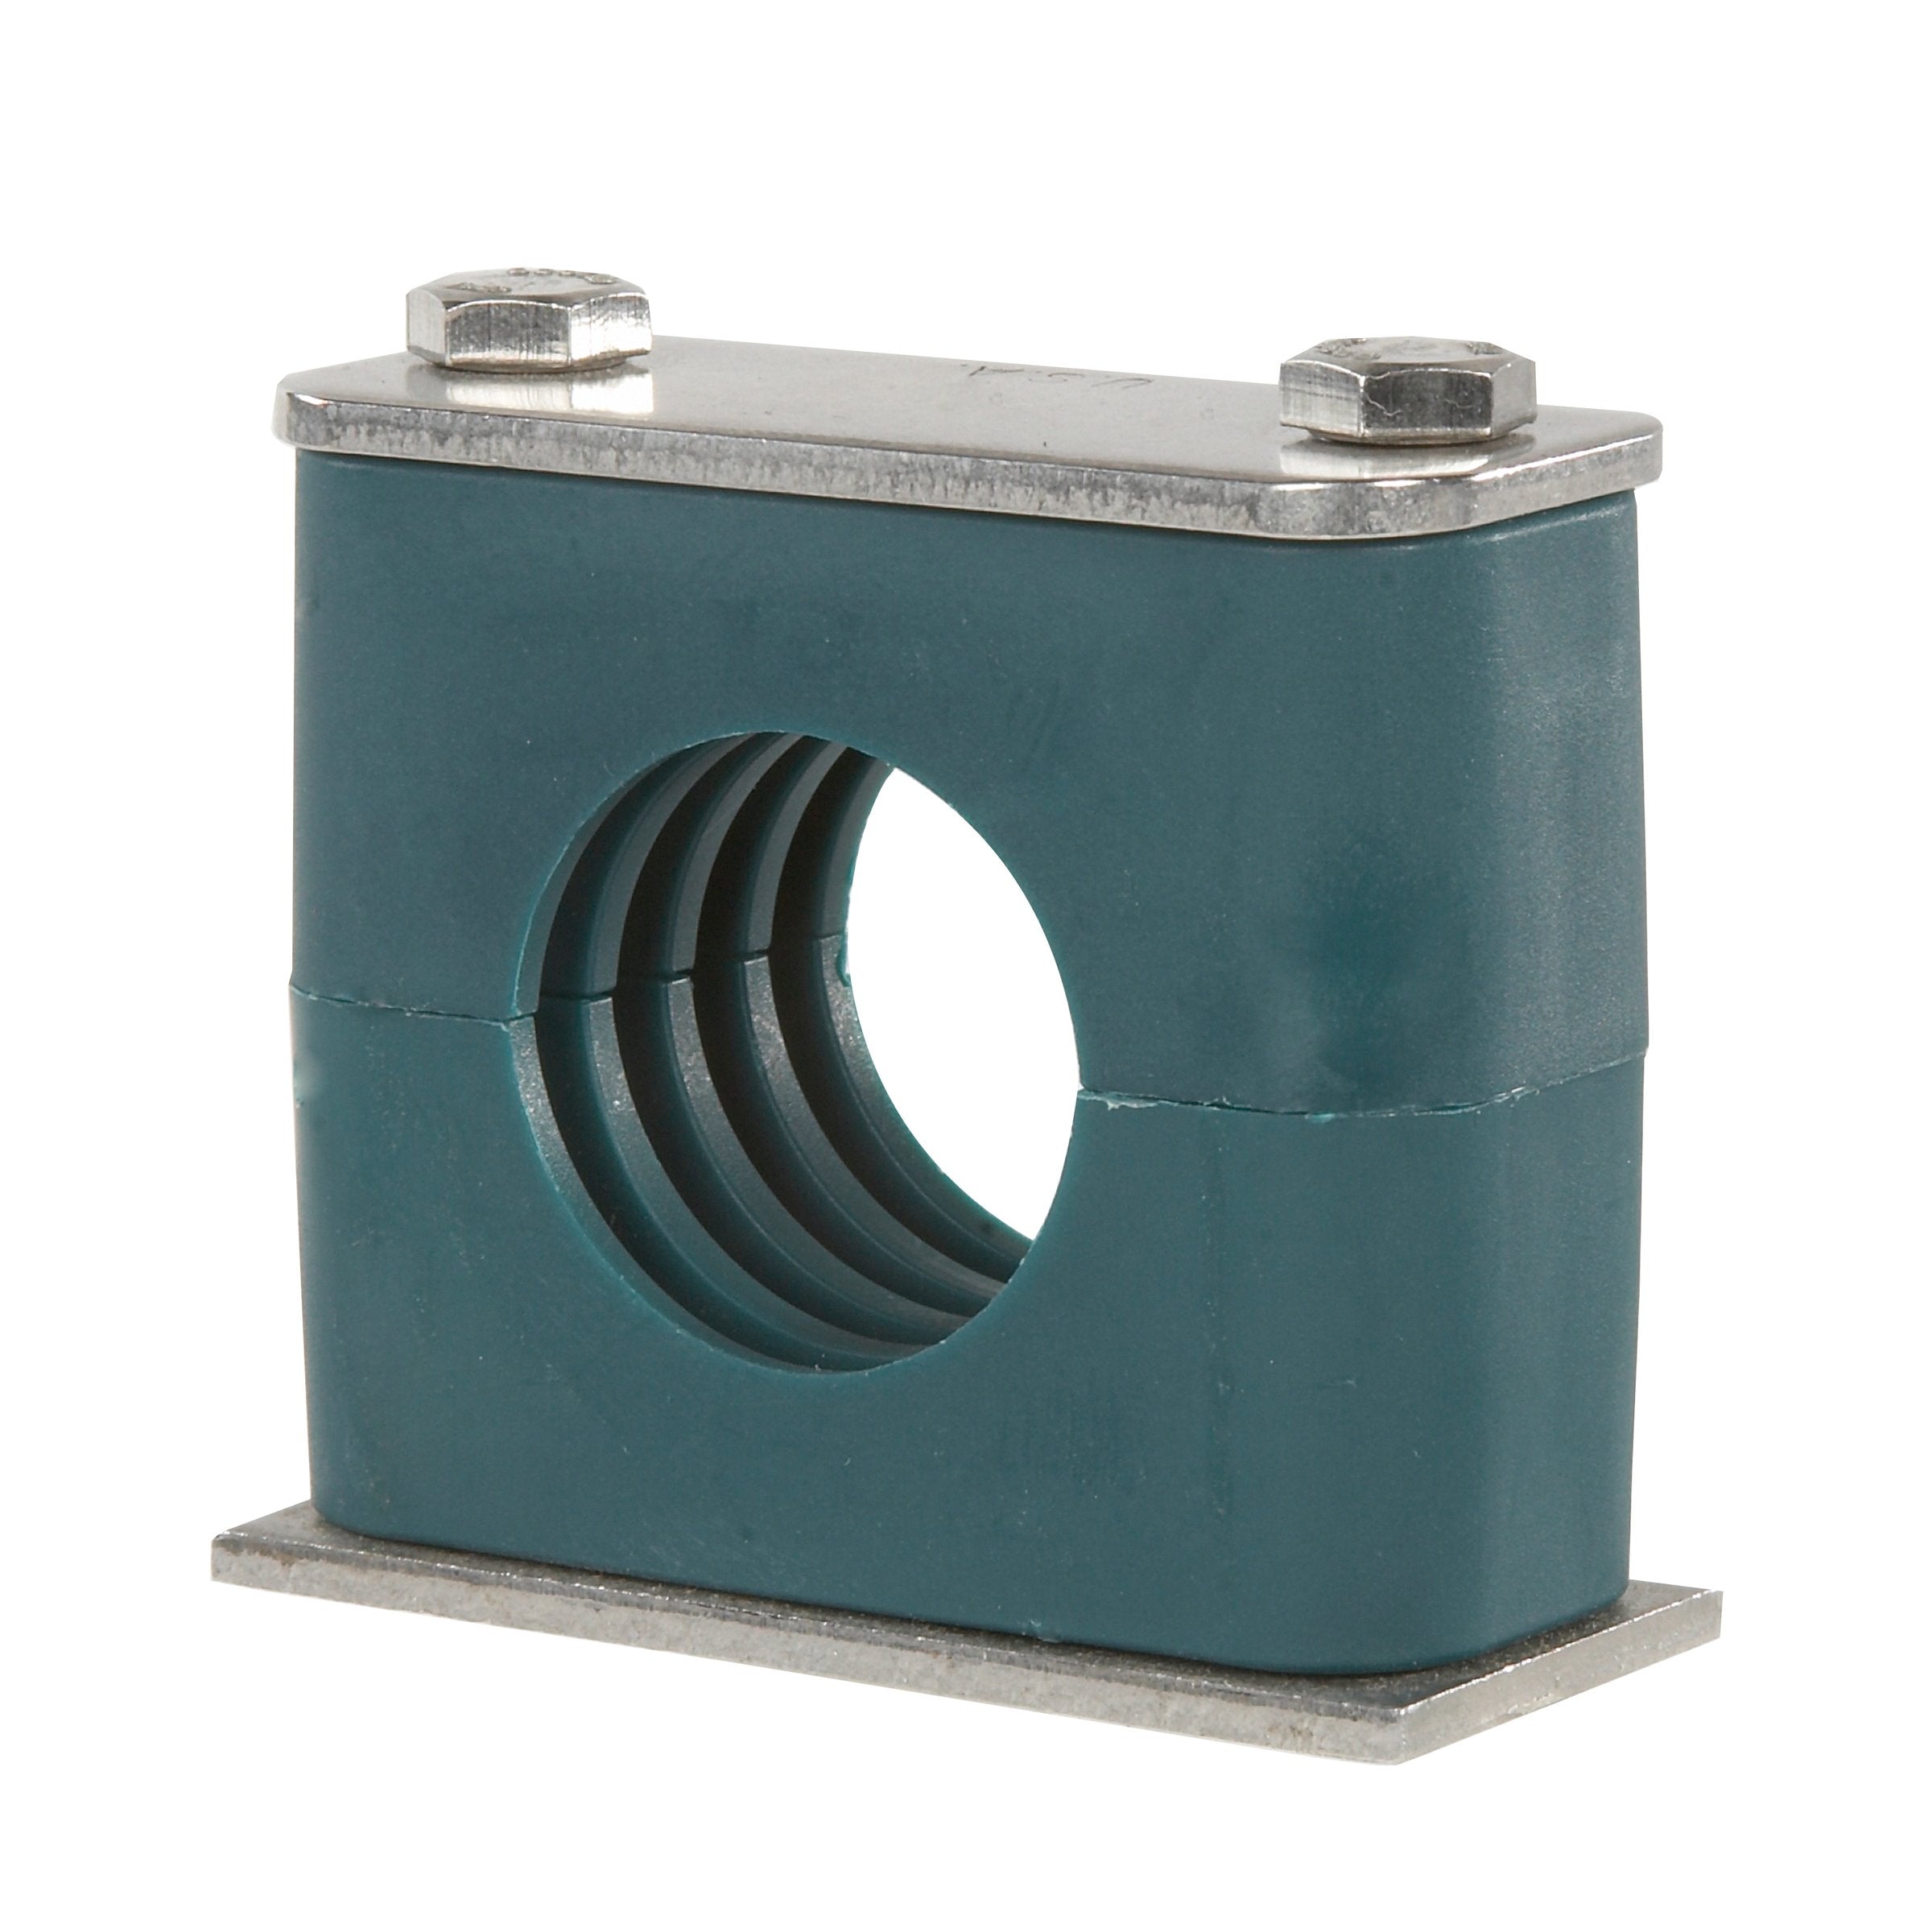 SP-322-PP-DP-AS-U-W10 : Stauff Clamp, Single Weld Plate, 0.875 inch (22mm) OD, for 7/8" Tube, Green PP Insert, Profiled Interior, Carbon Steel